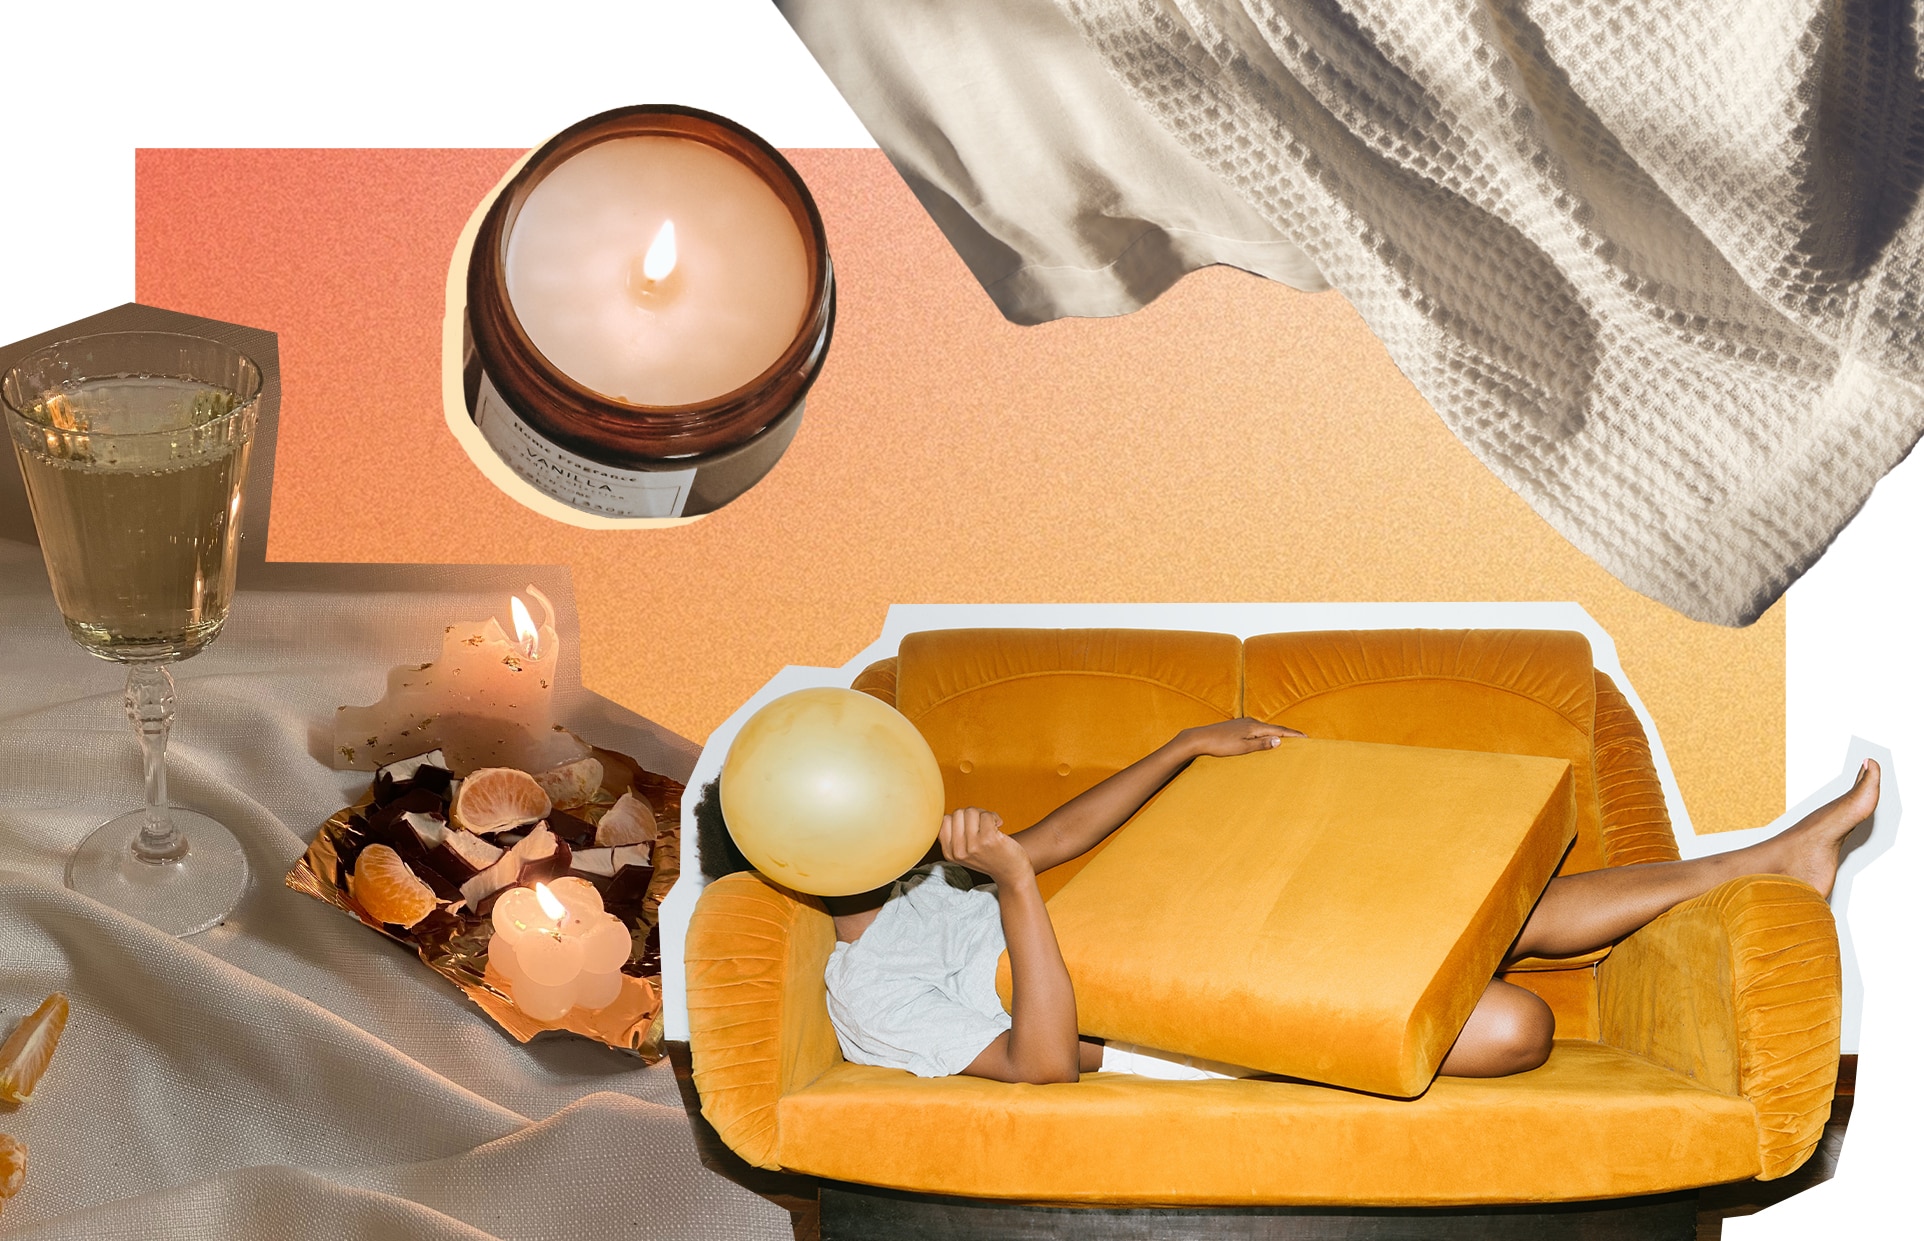 collage of interior design trends 2023, with woman on orange velvet couch with cushion seat on her body and balloon over her face. a vignette with silk wrap, champaign glass and candles are in one corner, the other a cotton waffle blanket.